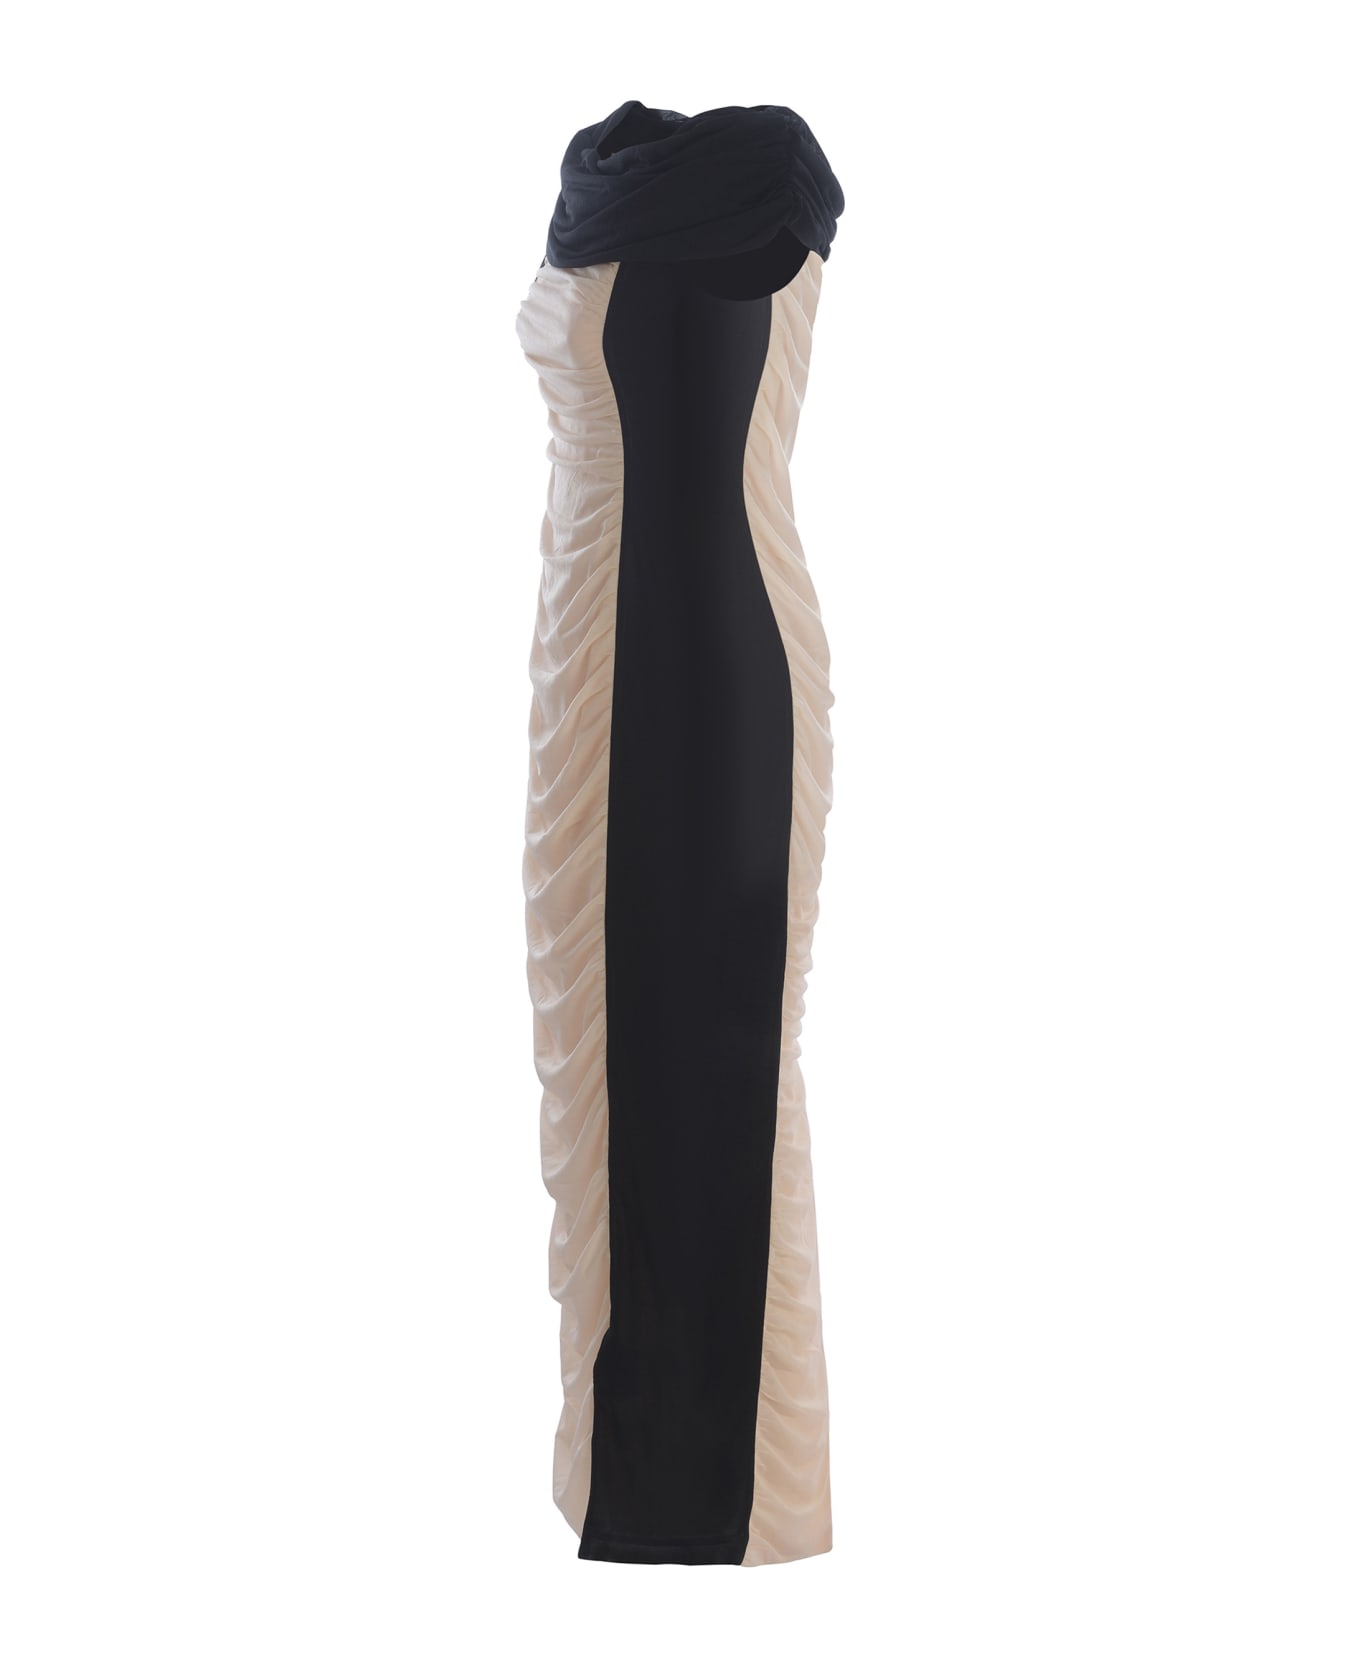 Rotate by Birger Christensen Dress Rotate Made Of Two-tone - Beige